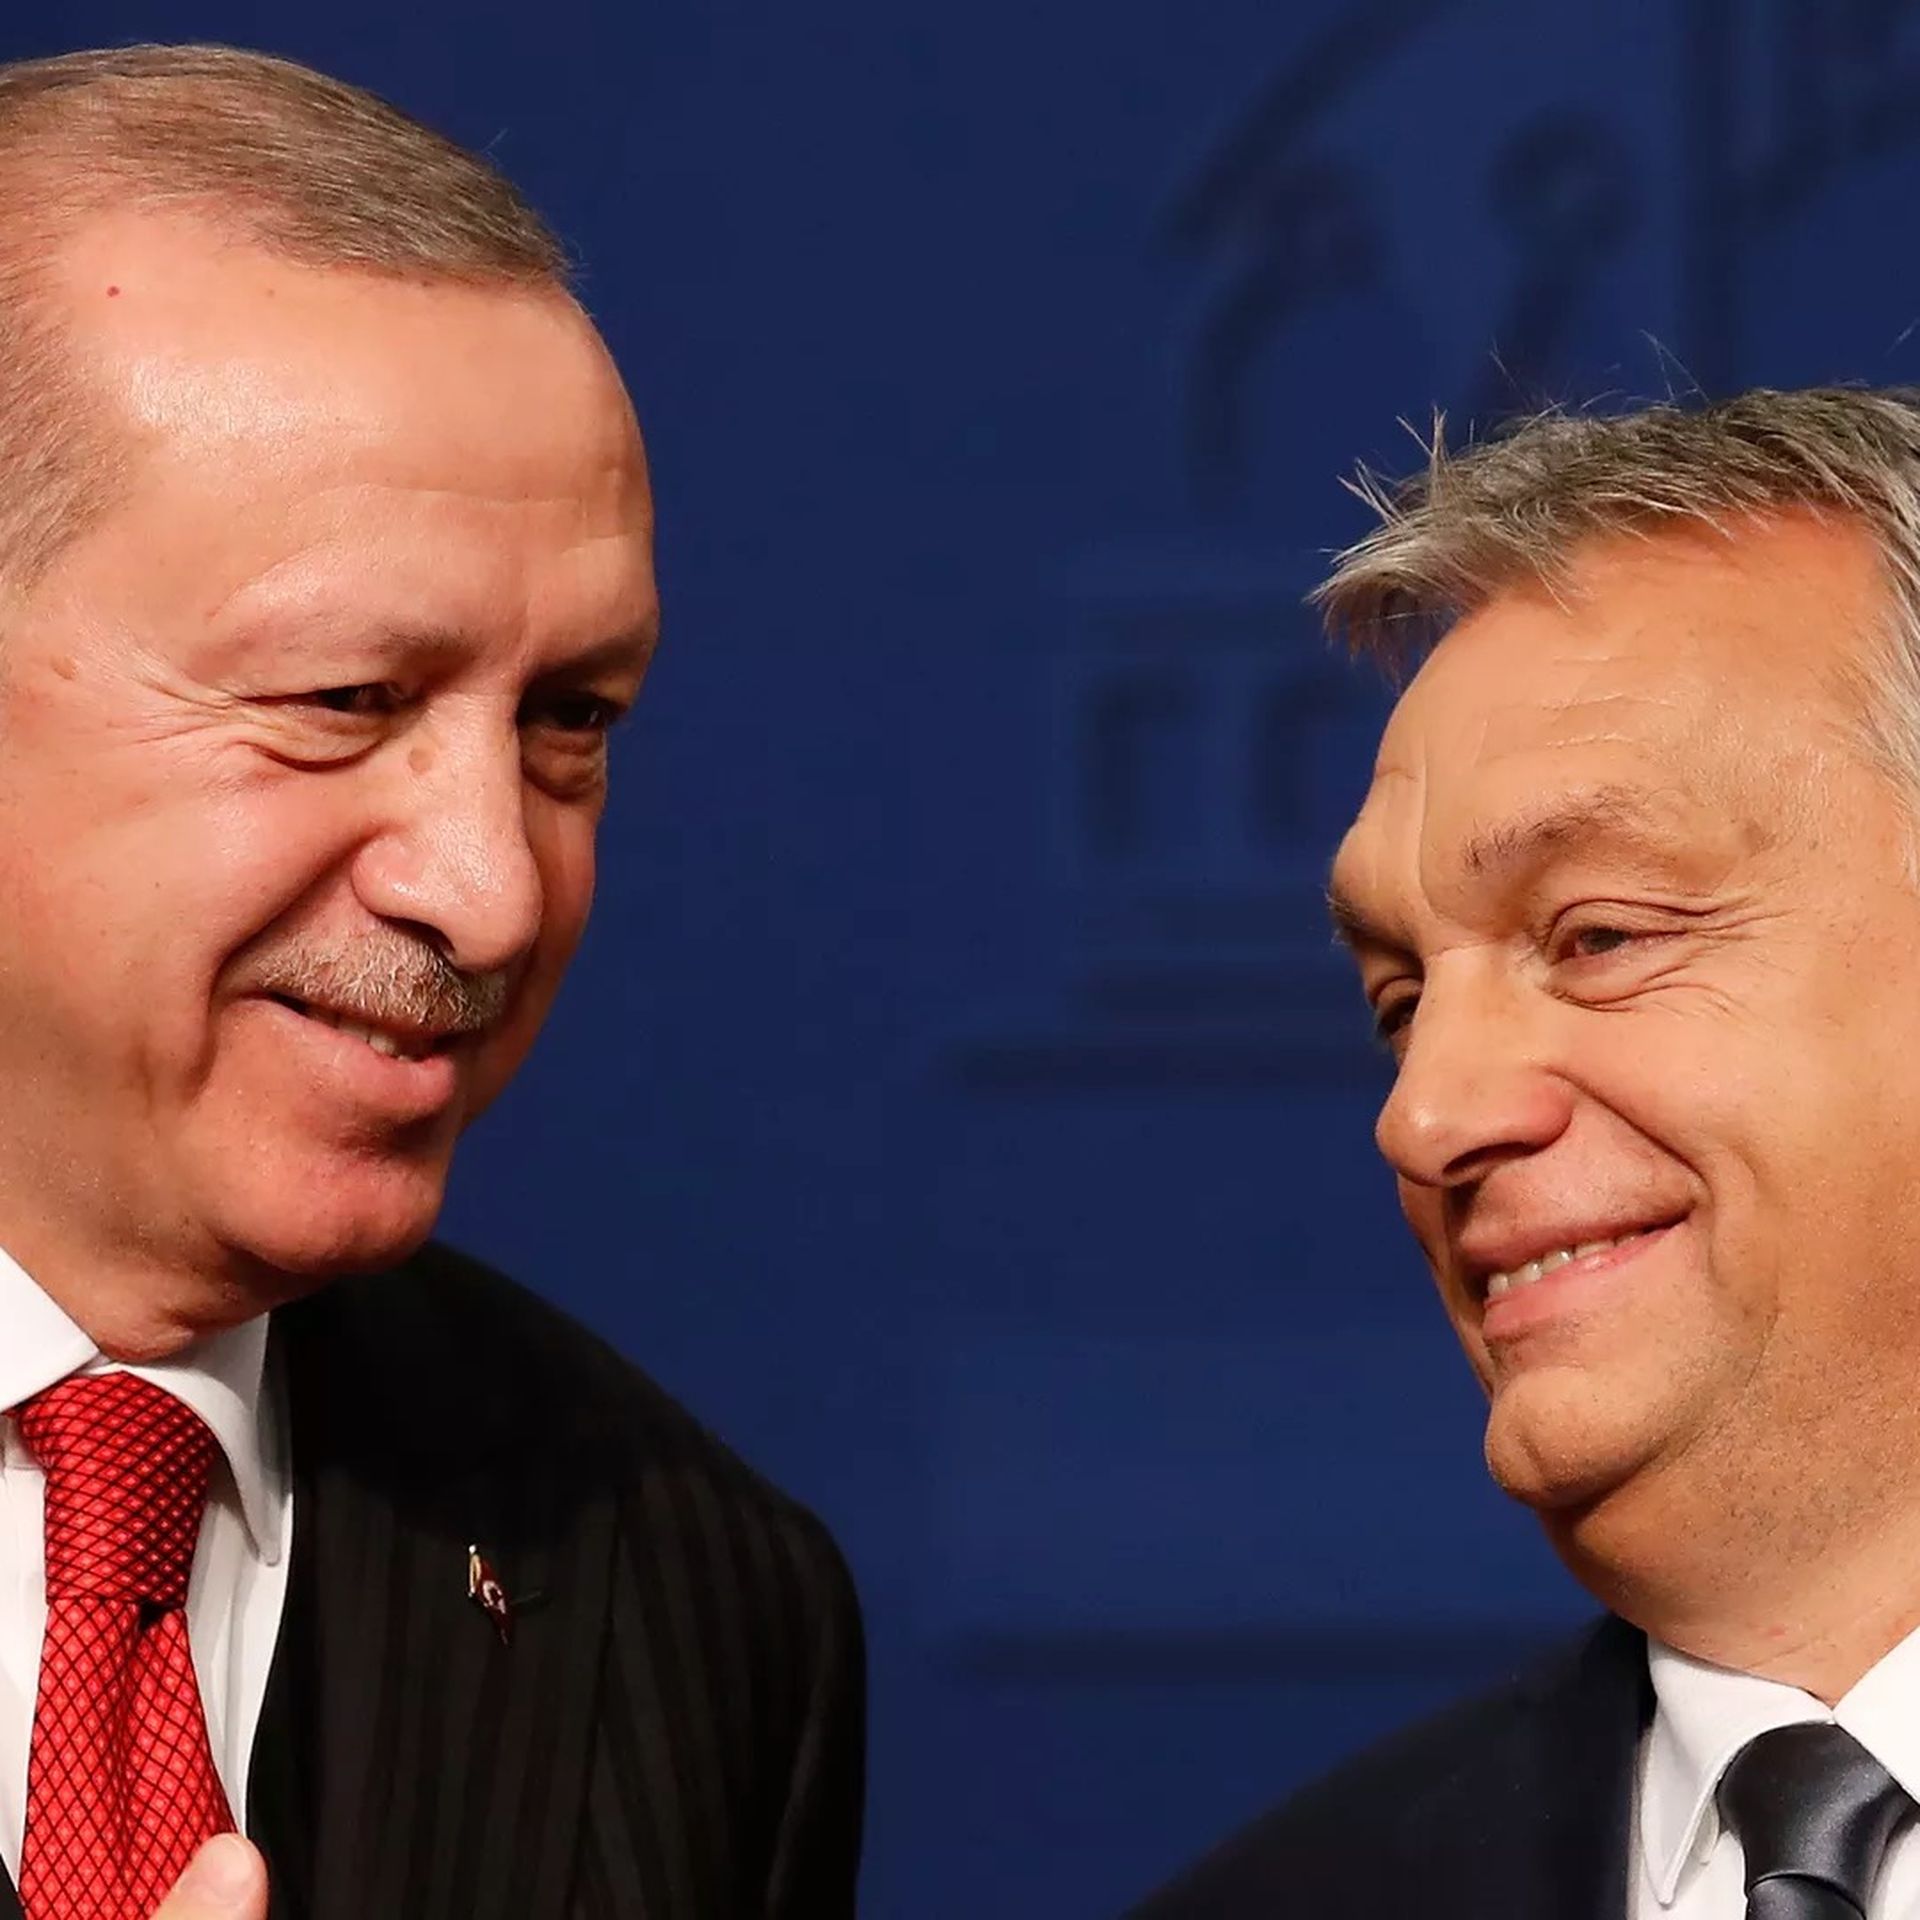 The president of Turkey and prime minister of Hungary are seen smiling together.